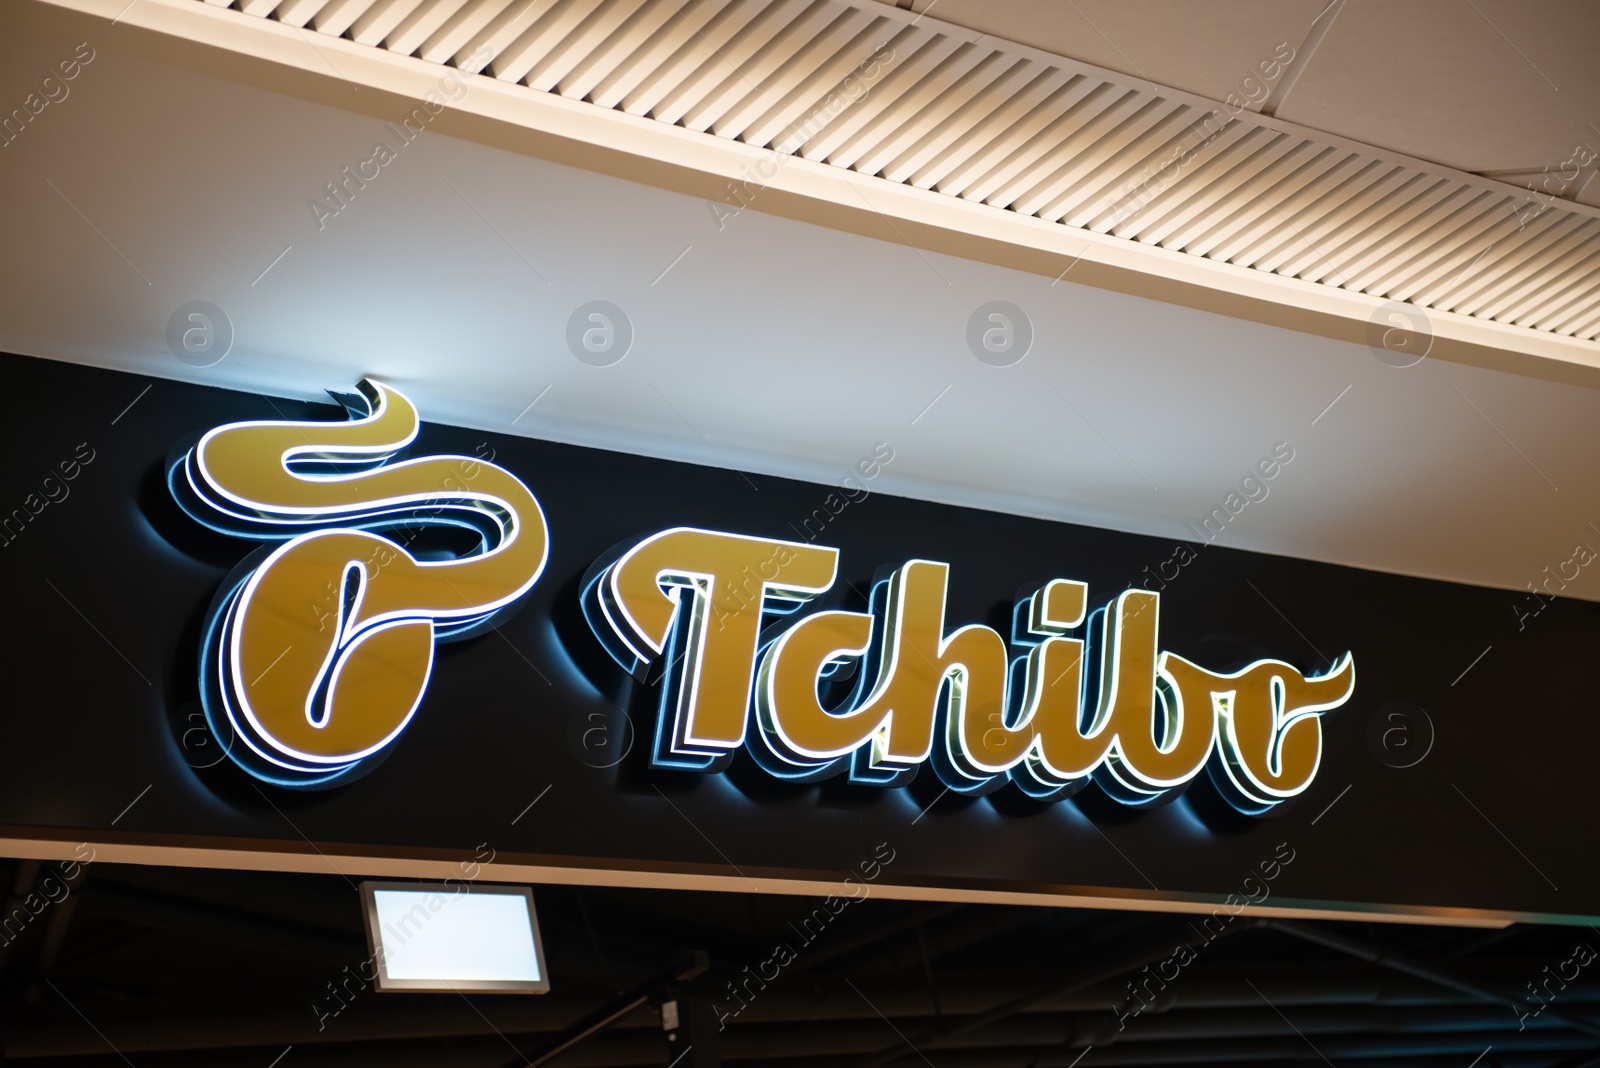 Photo of Warsaw, Poland - September 08, 2022: Tchibo store in shopping mall